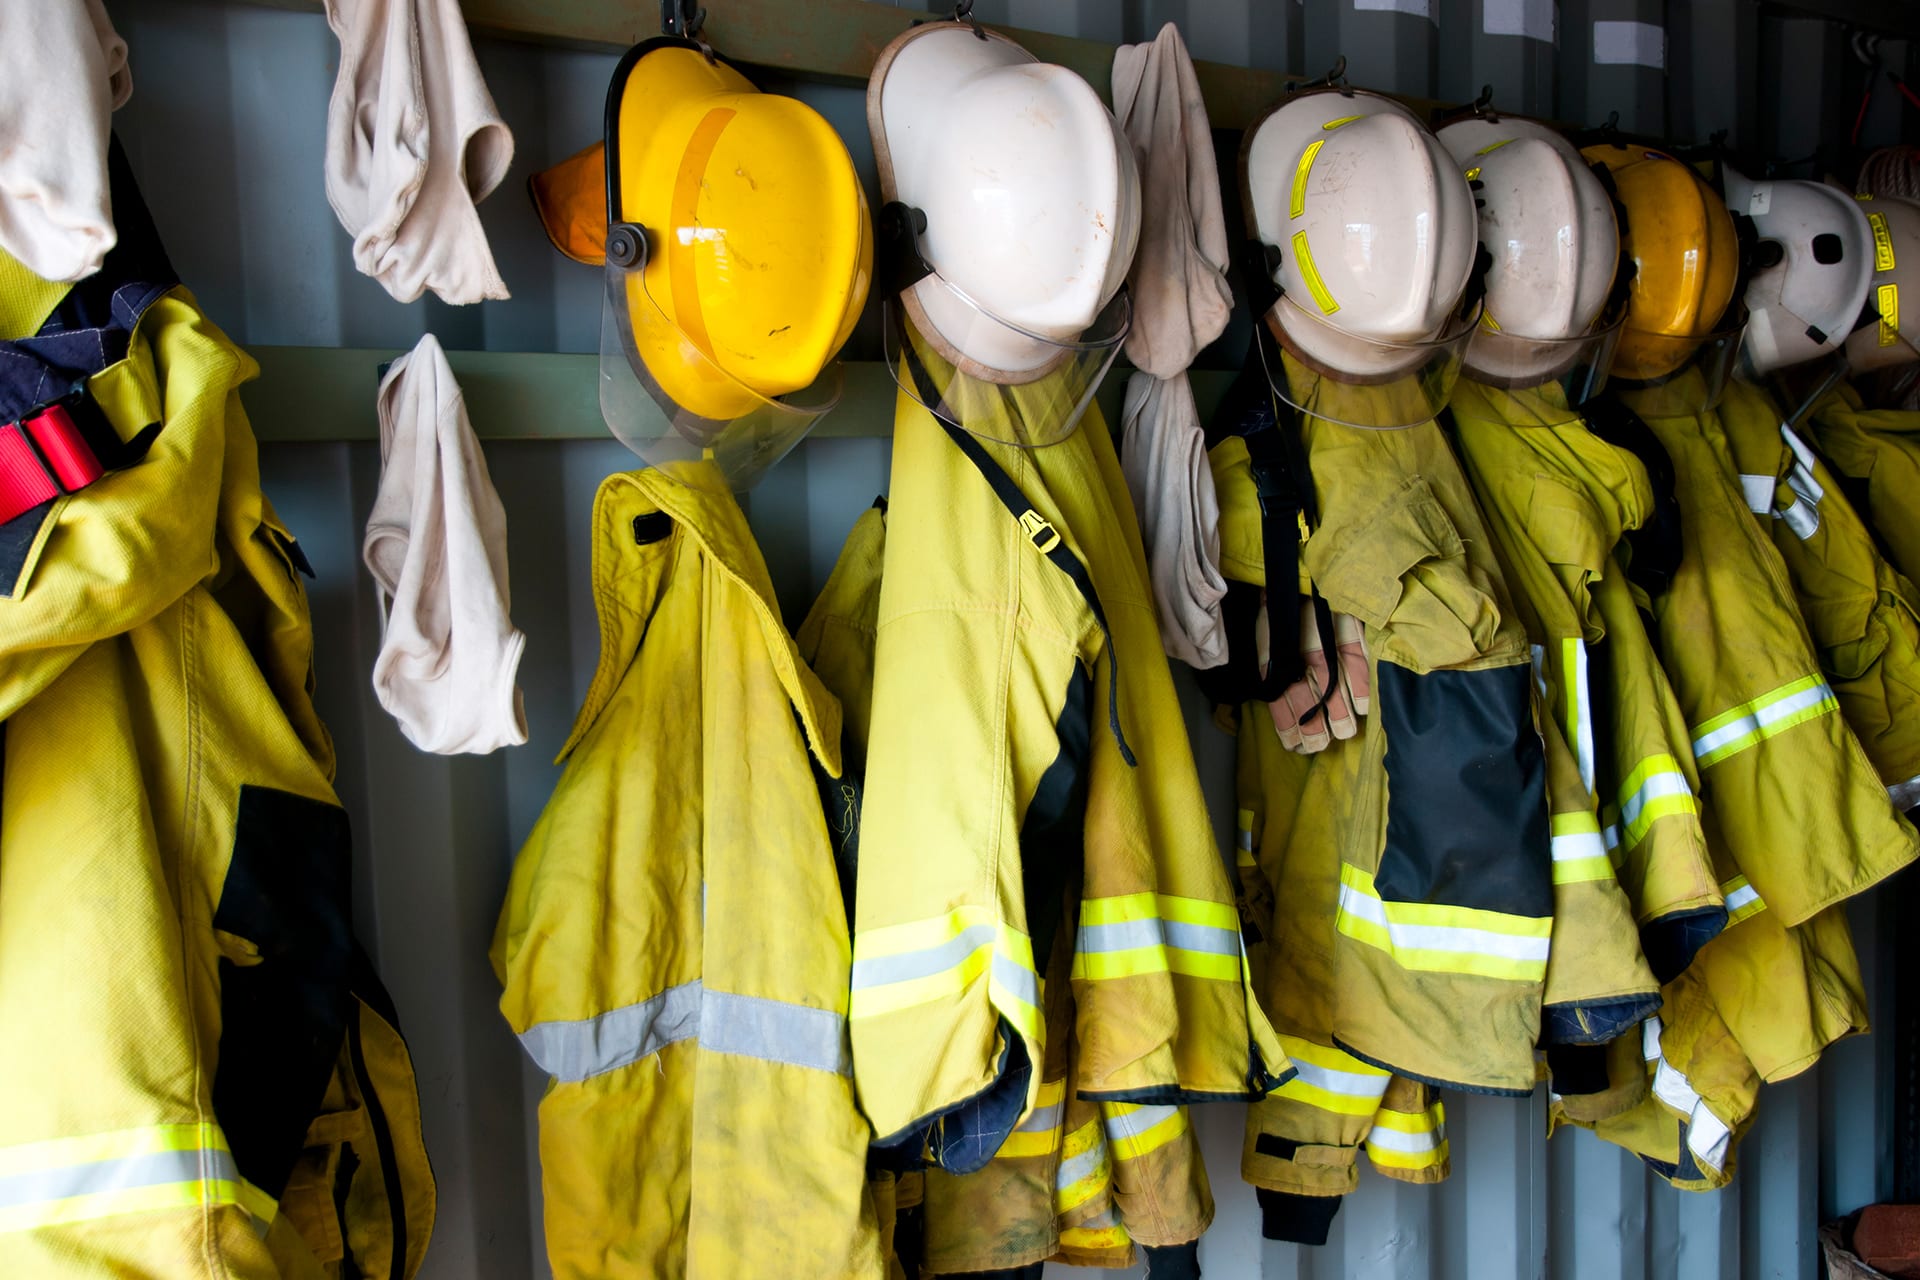 Firefighter Jackets and Helmets